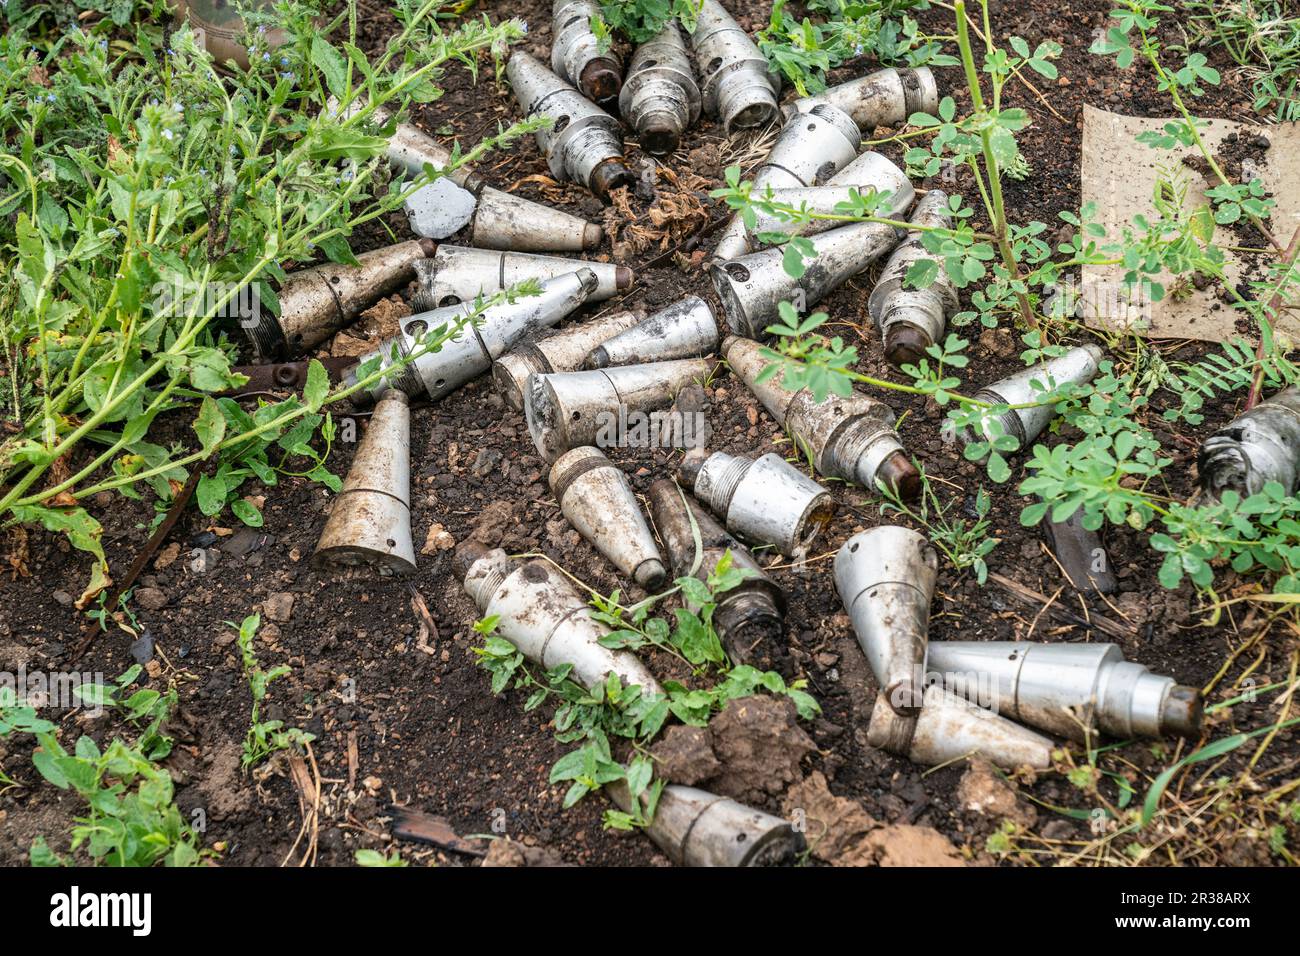 Remnants of fuzes of shells and rockets used by Russian forces against Ukraine collected by de-mining unit of National Guards of Ukraine ready for scrap removal seen in near Kherson in Ukraine on May 22, 2023 Stock Photo